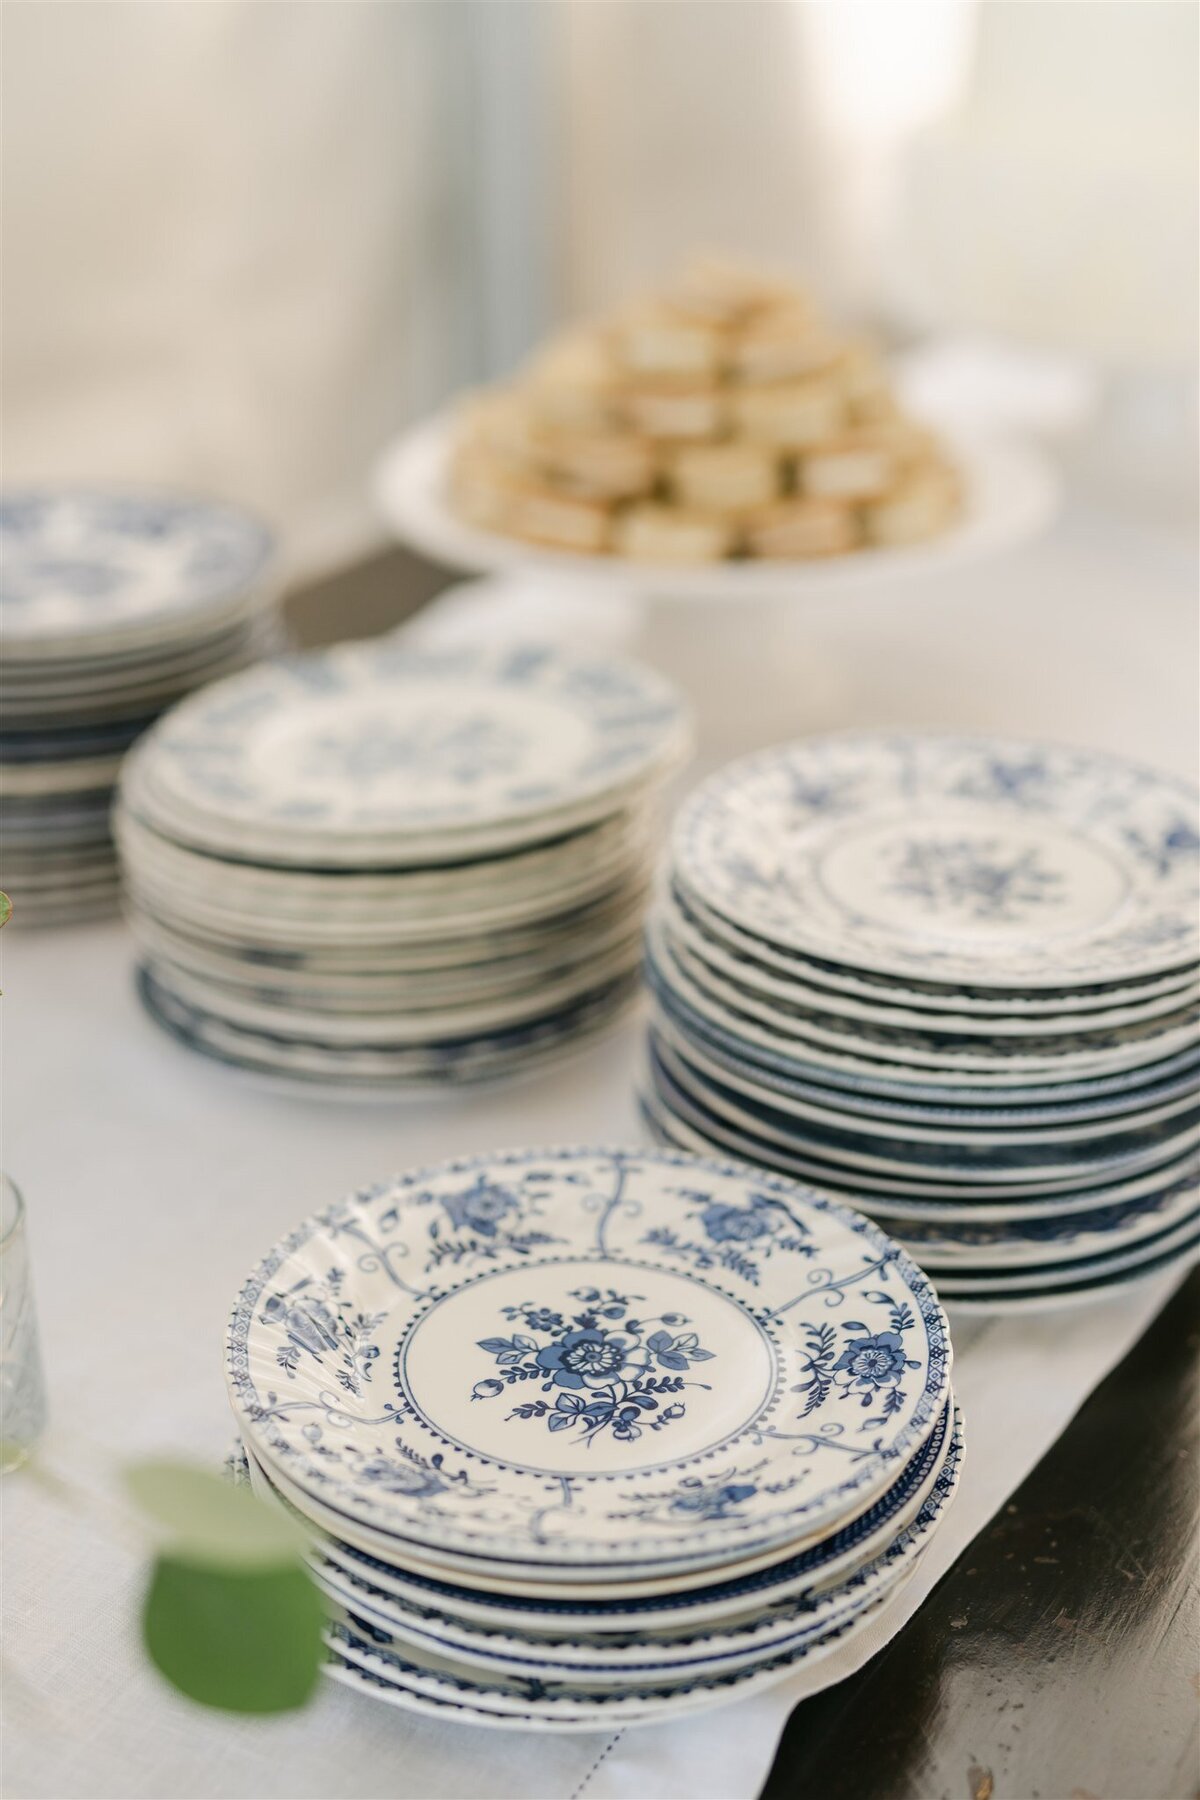 7-Blue and White Ginger Jar Inspired Wedding Desserts-Oak Hill Country Club Wedding-Verve Event Co (4)